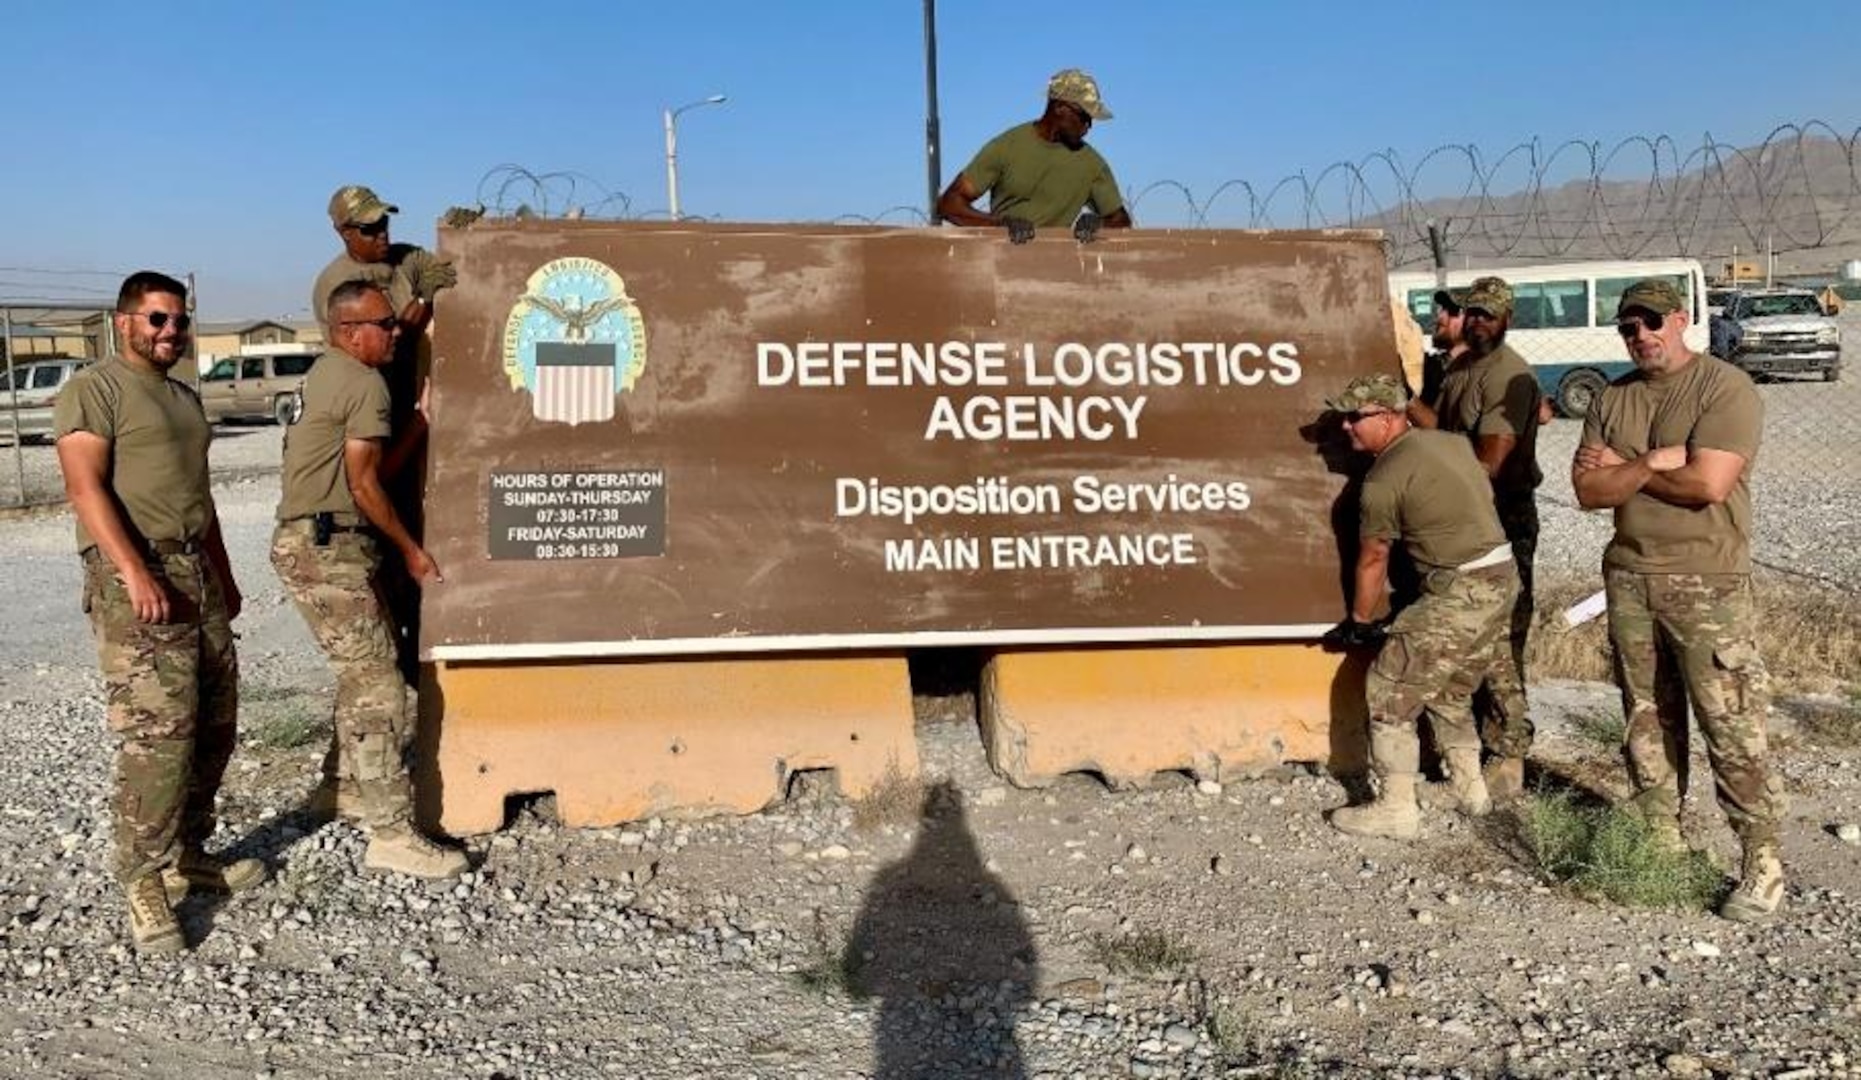 Disposition Services members next to DLA sign in Afghanistan